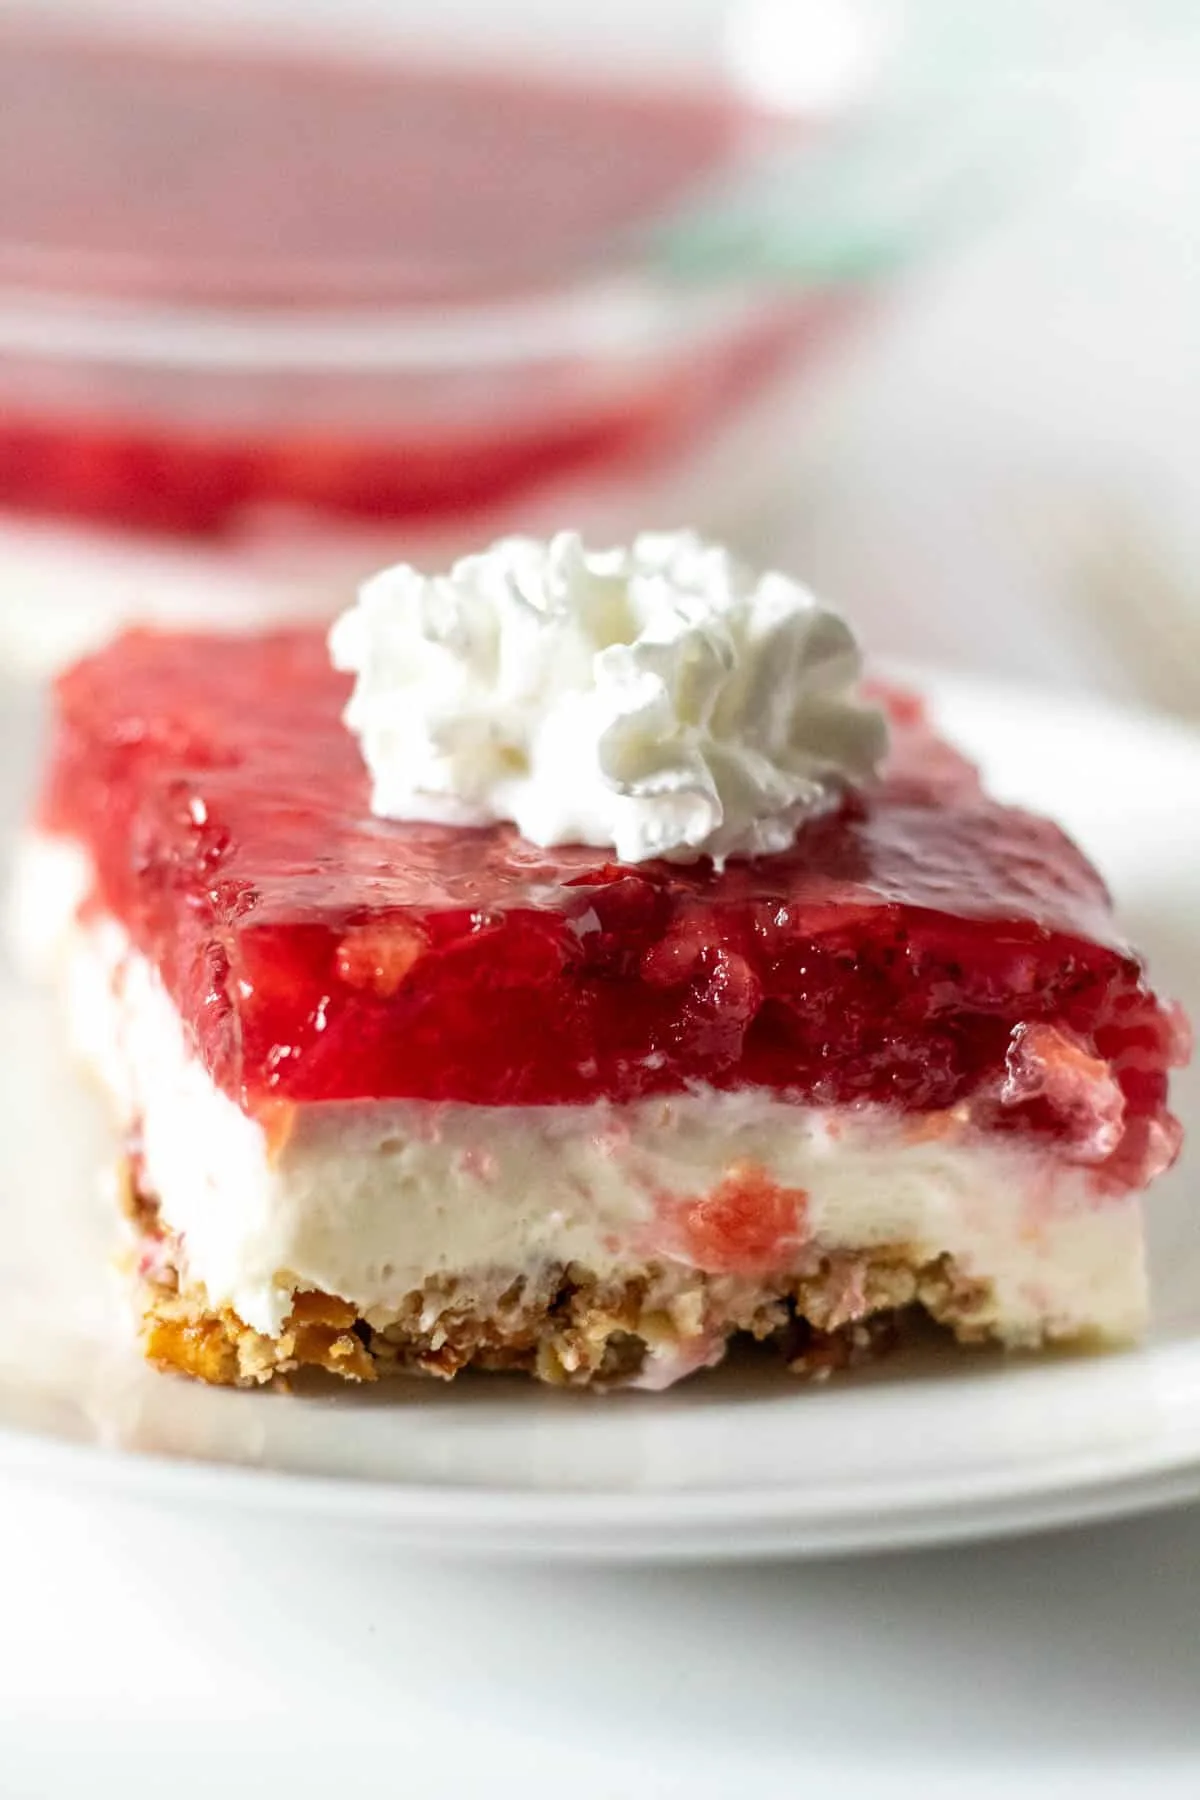 Slice of strawberry pretzel salad with whipped cream on top.